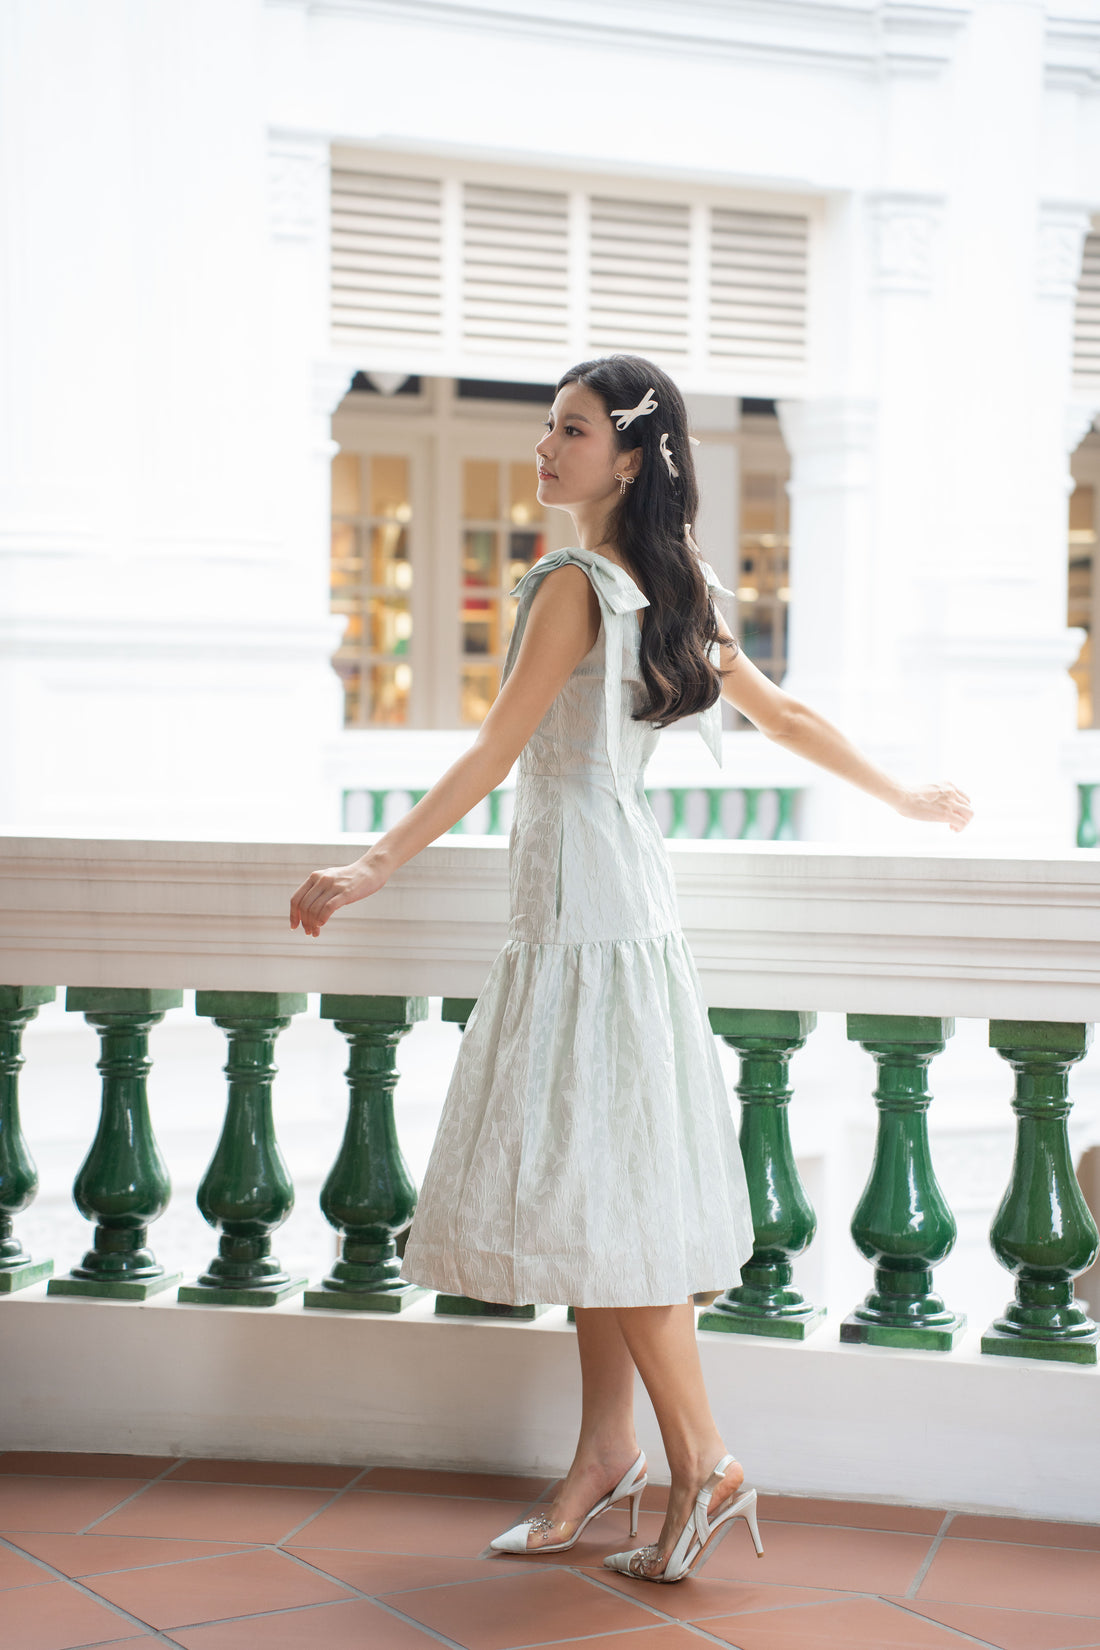 Elevate Your Wardrobe: Premium Clothing for Women in Singapore